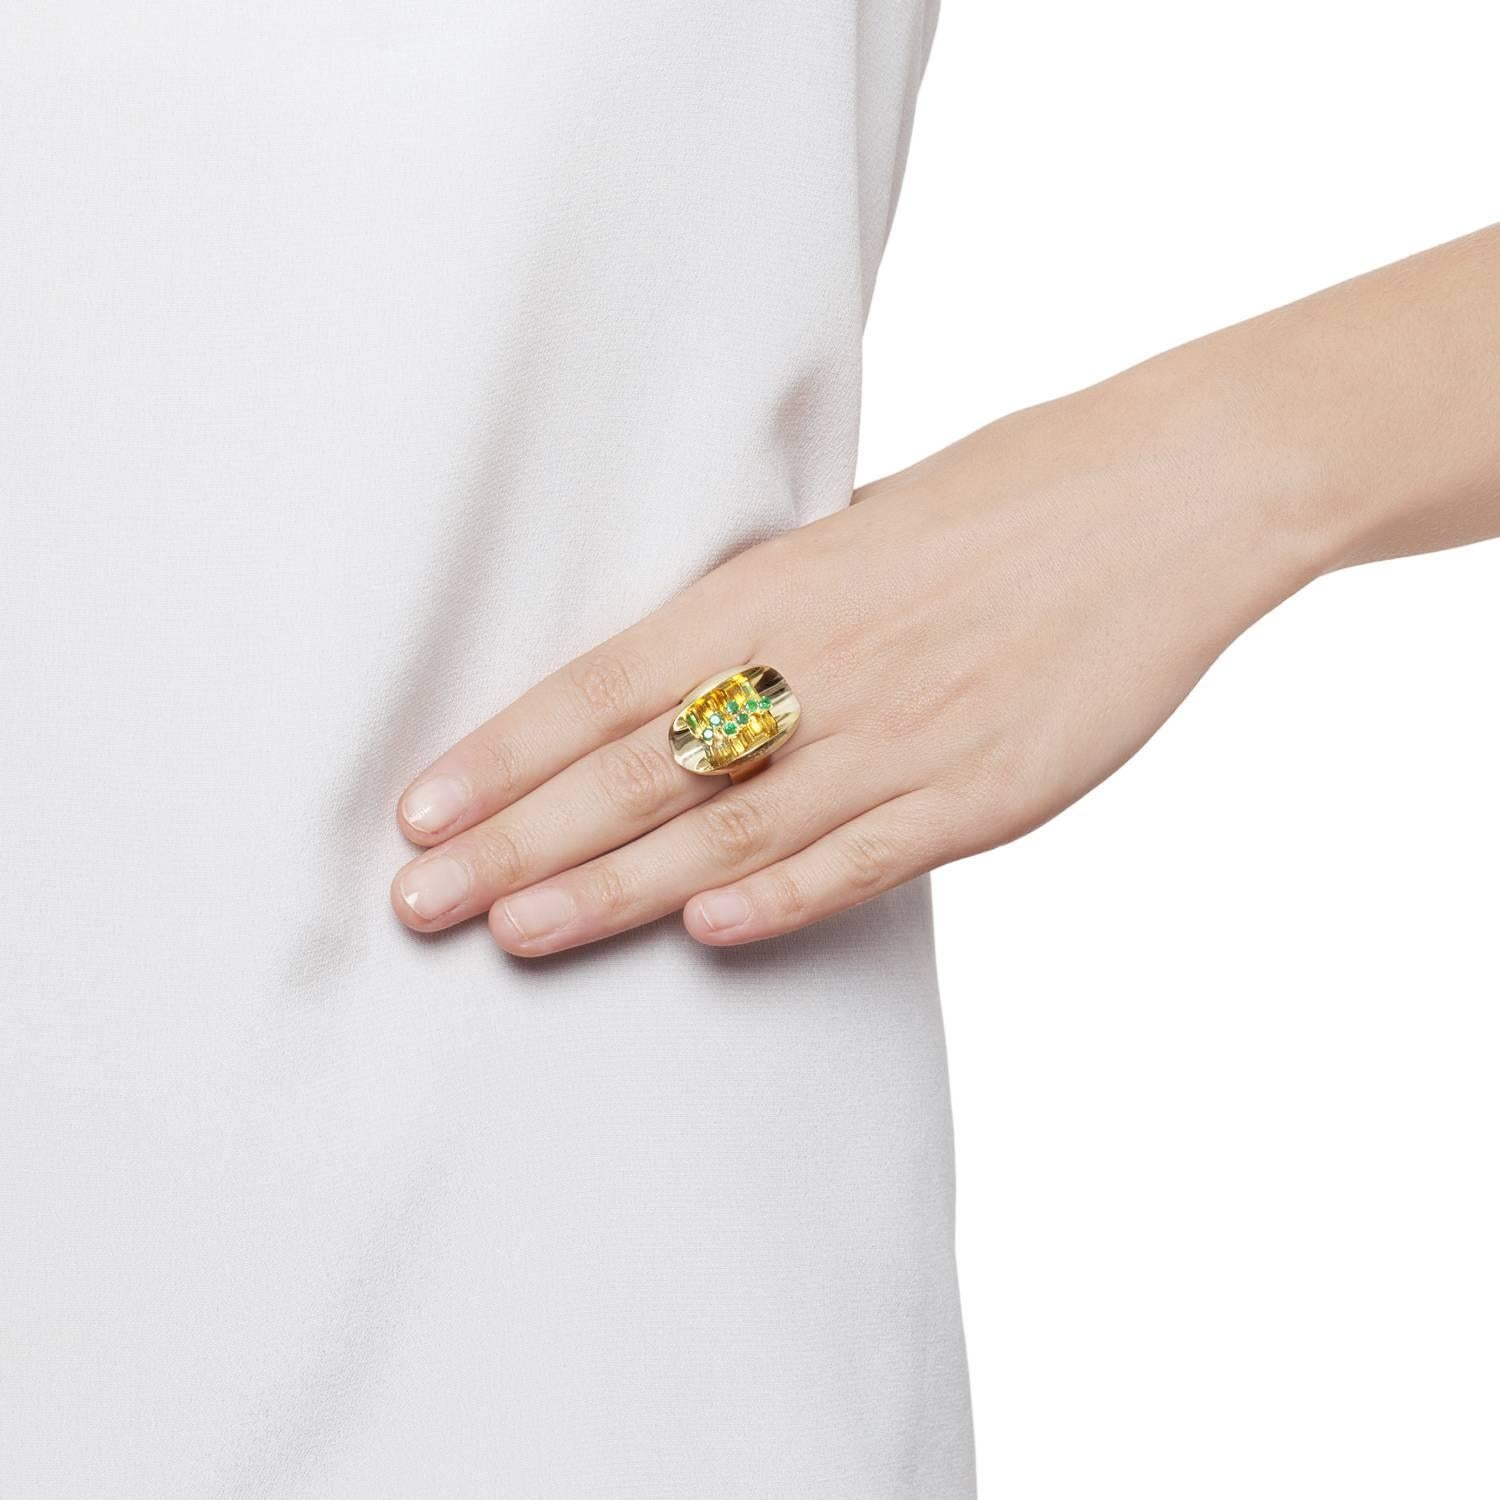 An Emerald set complex handmade Yellow Gold Ring. A striking miniature sculpture, the Ellipse rings feature concave forms creating depth and myriad reflections of the delicately set gemstones within. From every view there is an additional detail and